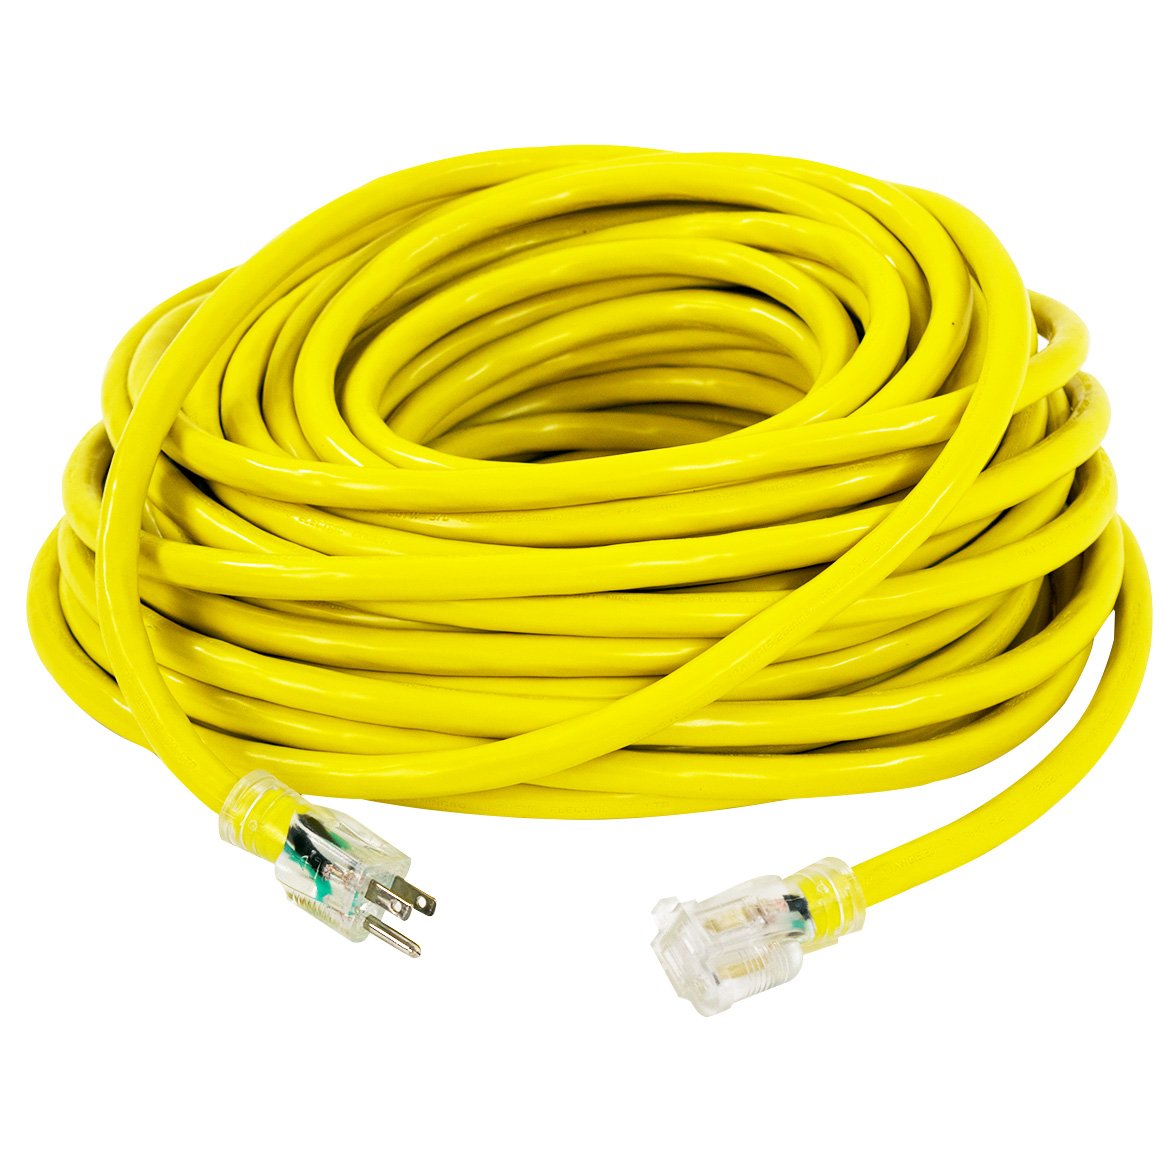 DuroMax XPC10050A Outdoor Extension Cord, XPC10050A 50' 10-Gauge Single Tap